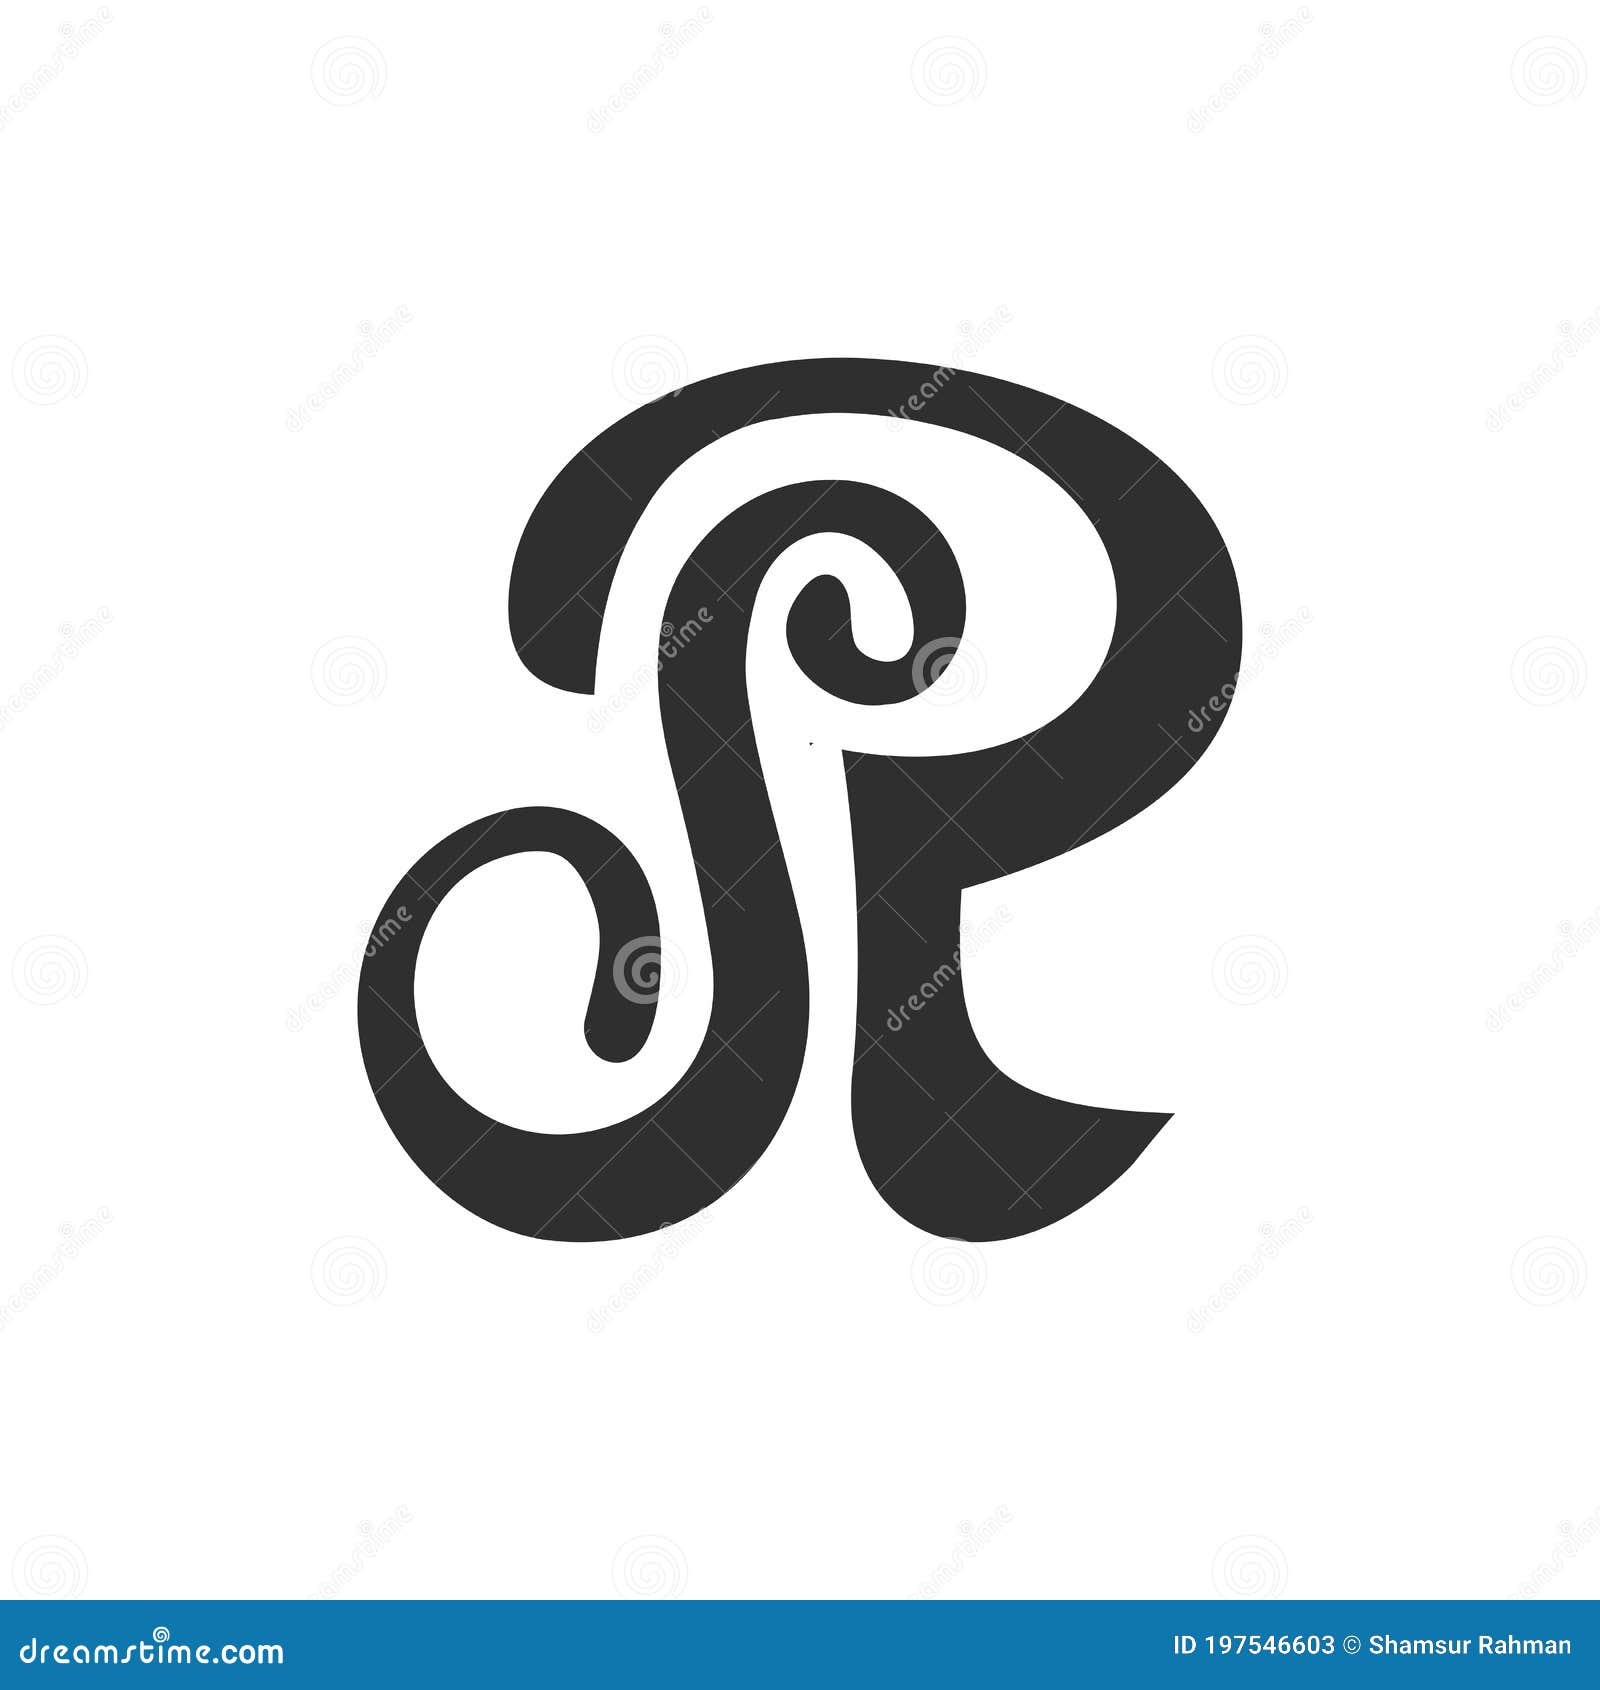 965 Letter R Tattoo Images Stock Photos  Vectors  Shutterstock